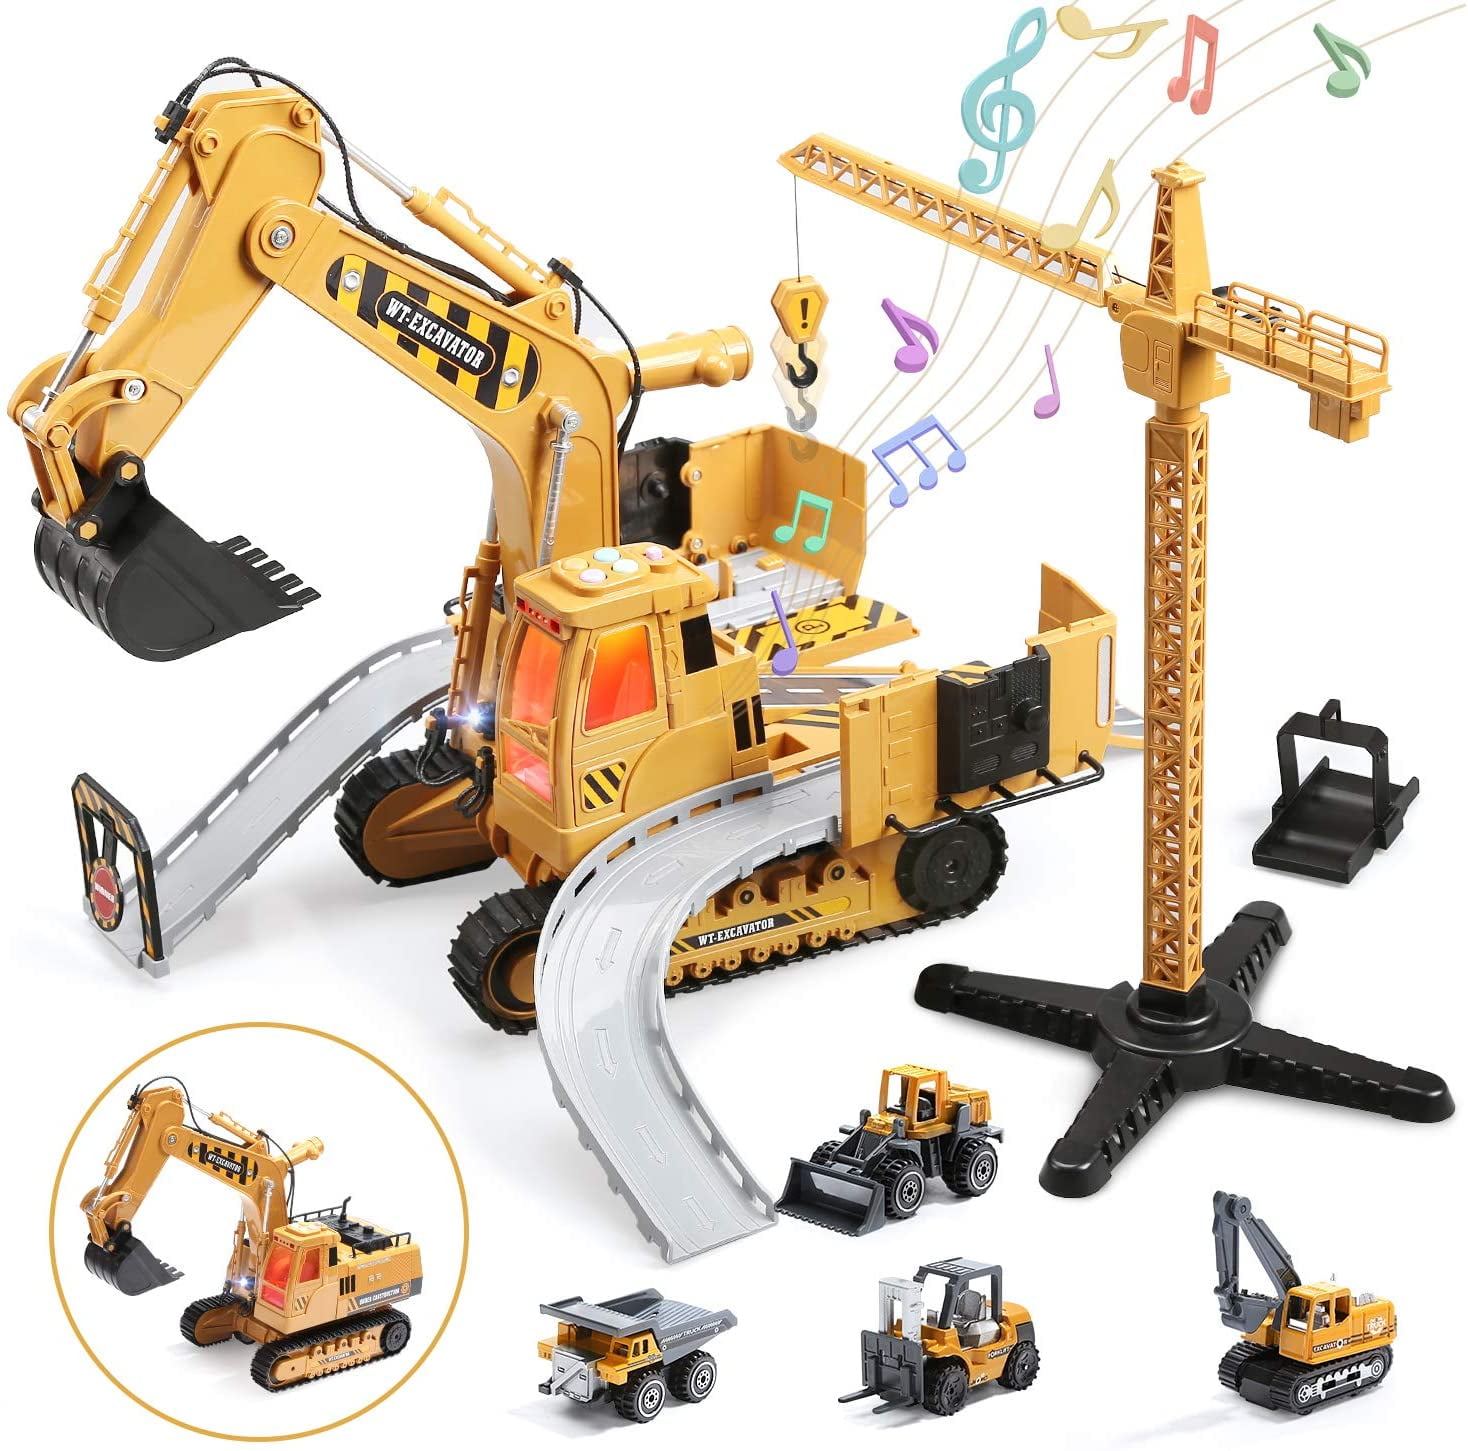 Kids Tower Remote Control RC Crane Construction Engineering Vehicle Toy Playset